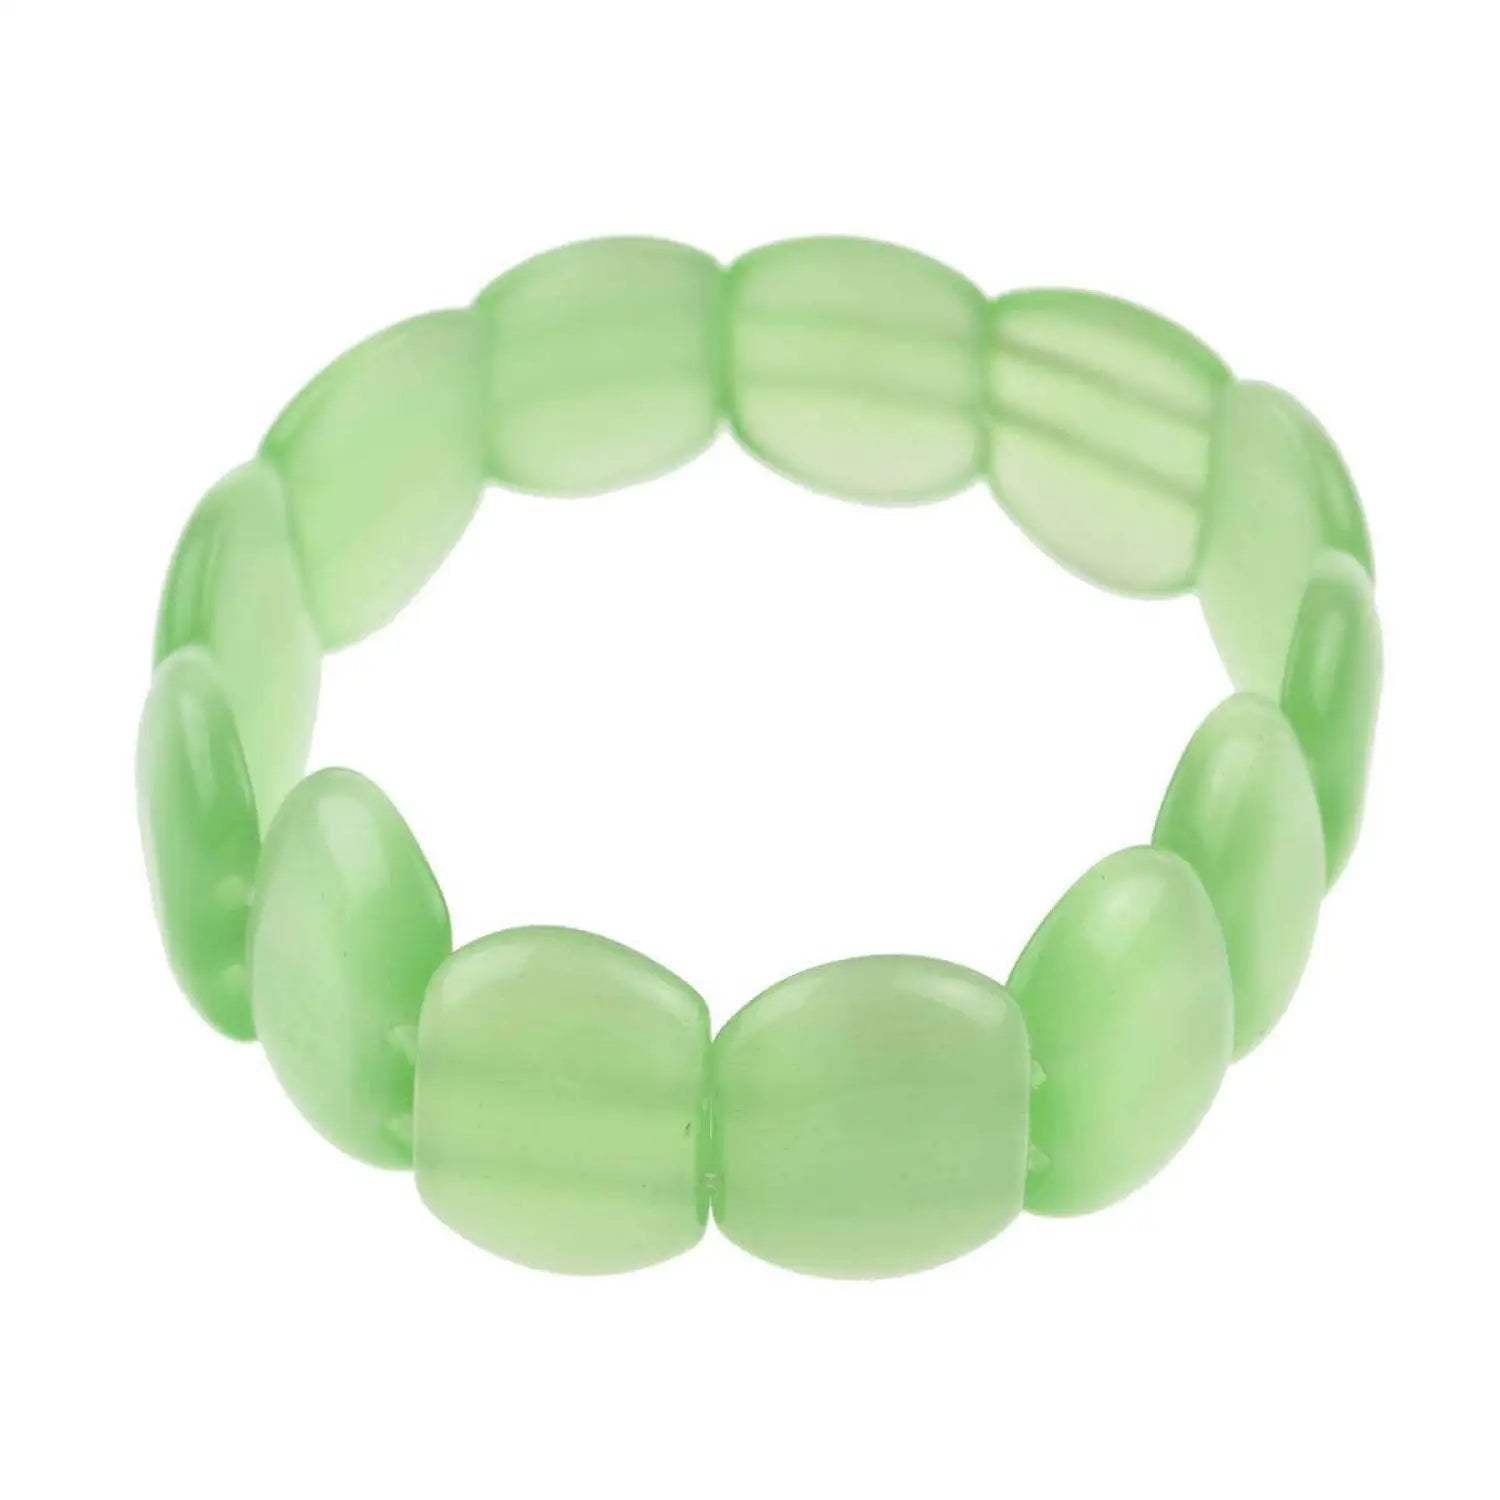 Pastel plastic bead bracelet perfect for every occasion